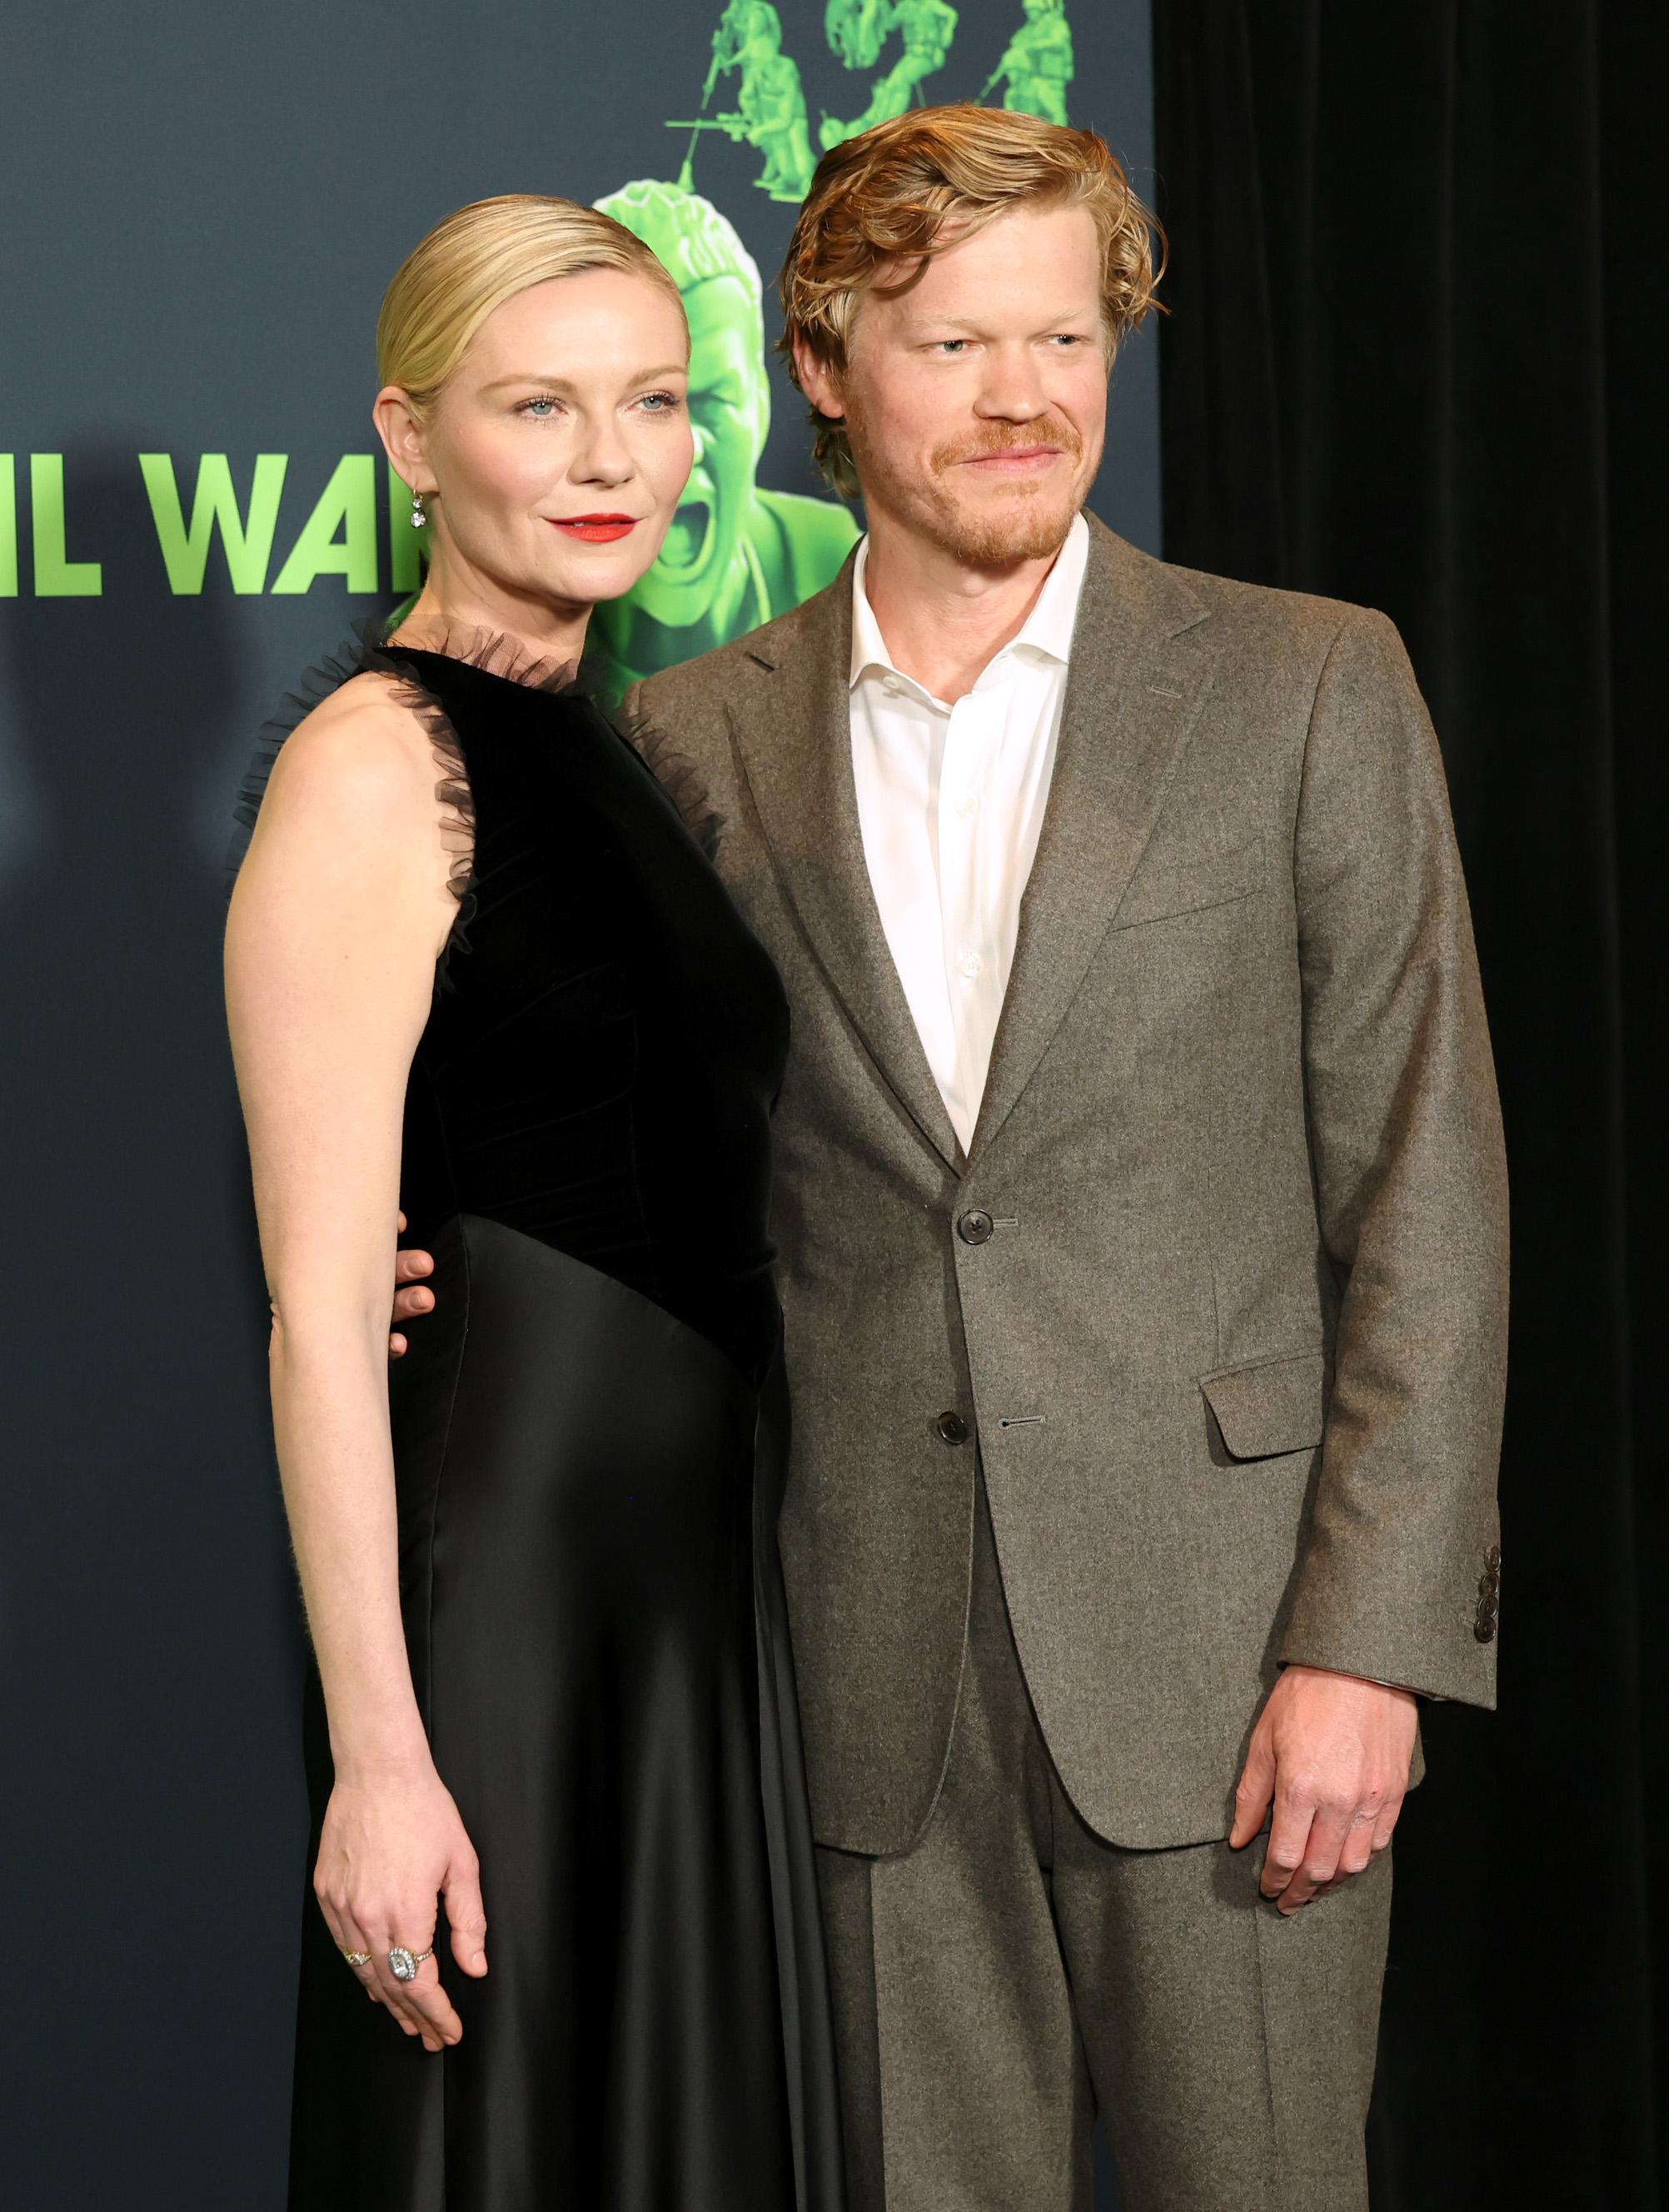 Two actors posing together; one in a black sleeveless dress, the other in a grey suit with a white shirt